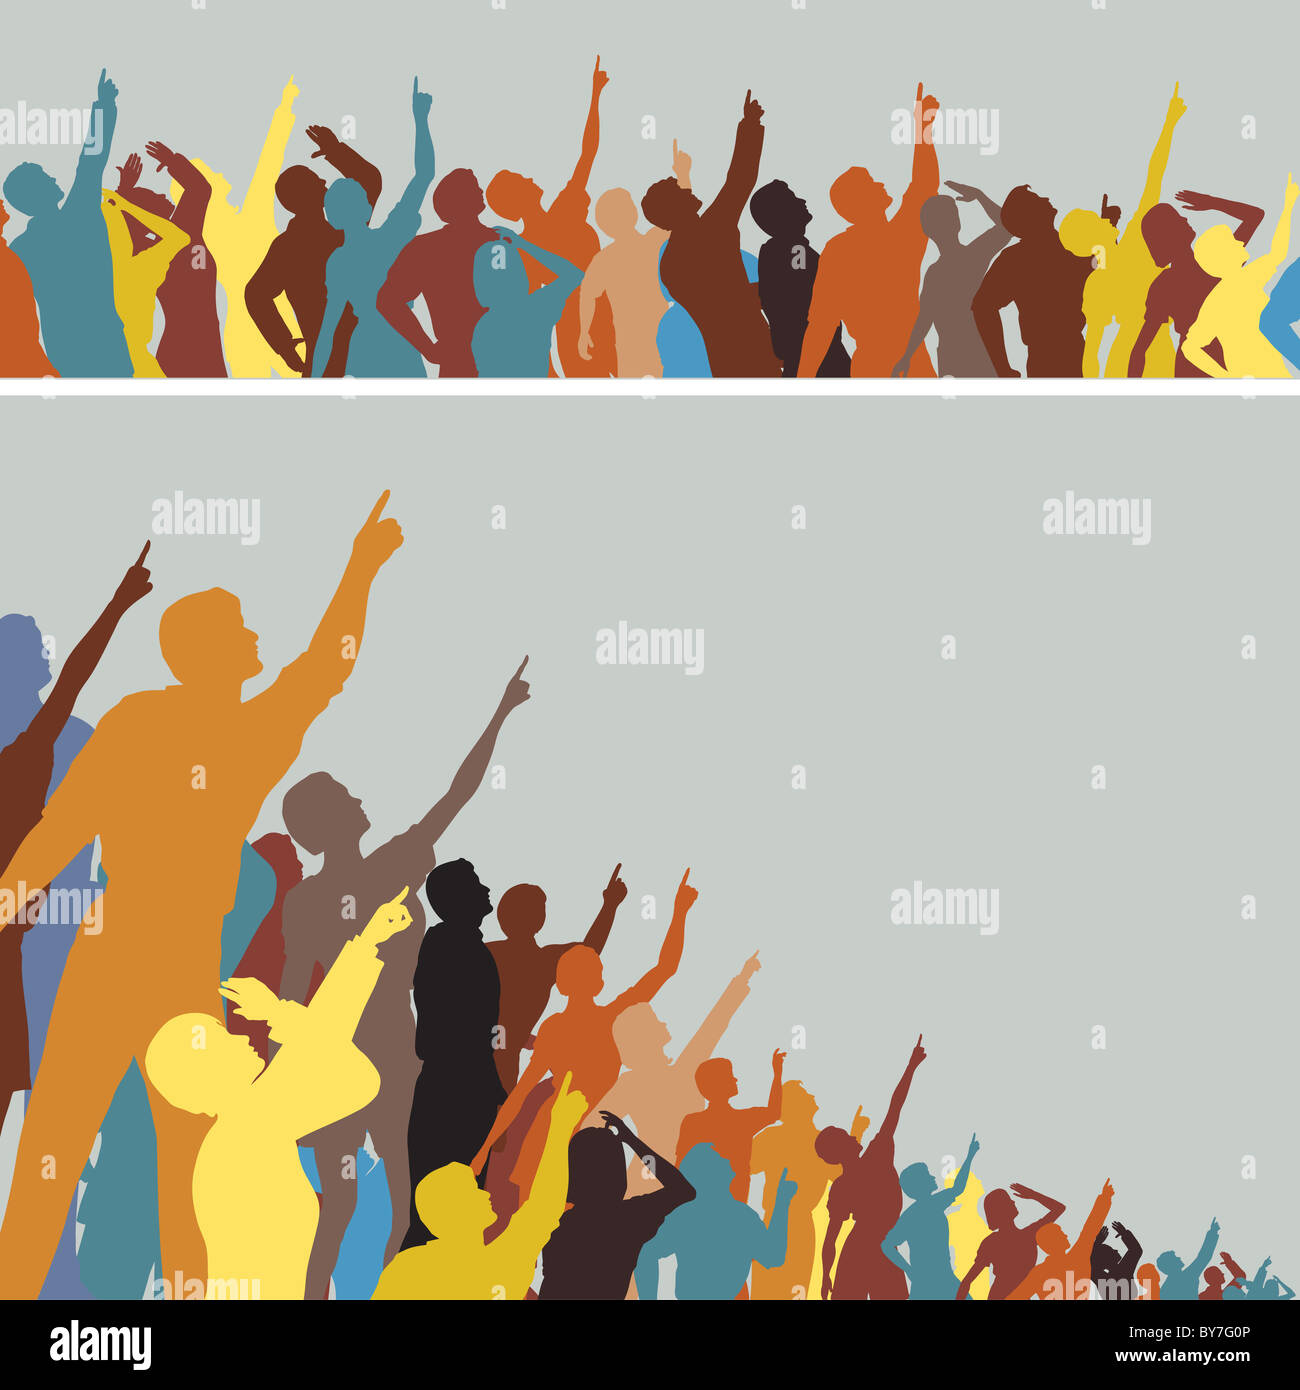 Two colorful illustrated silhouettes of crowds pointing and looking upwards Stock Photo